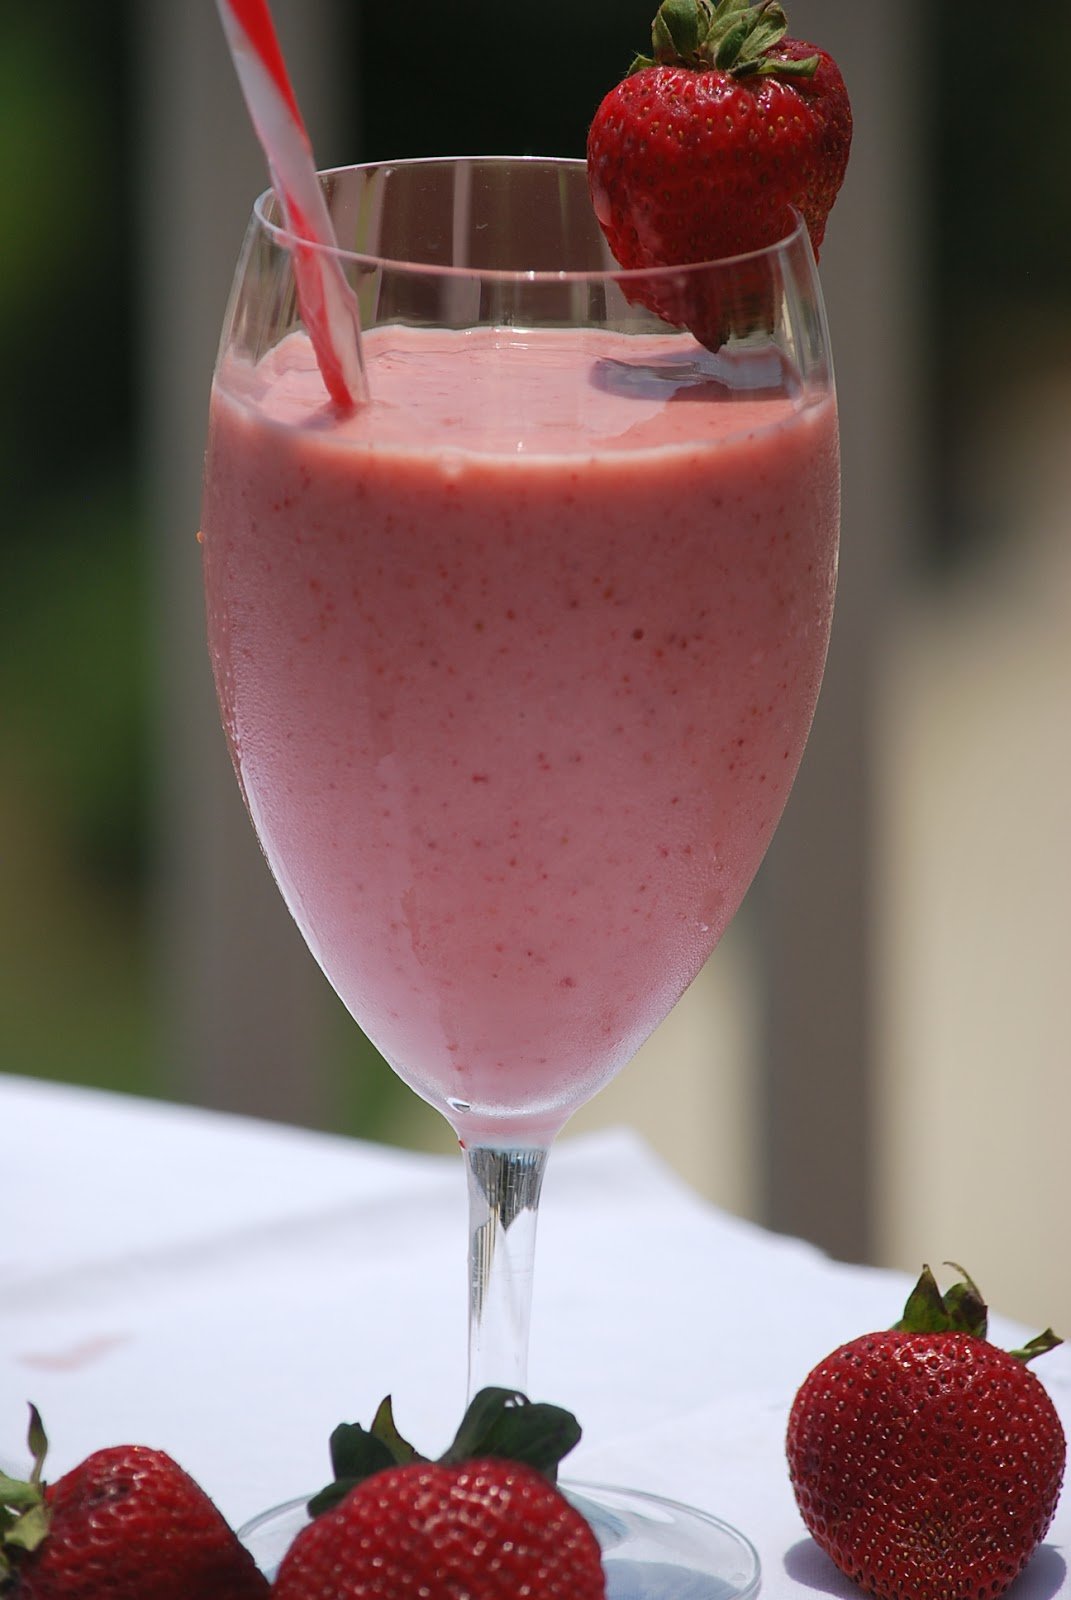 My story in recipes: Strawberry Banana Smoothie